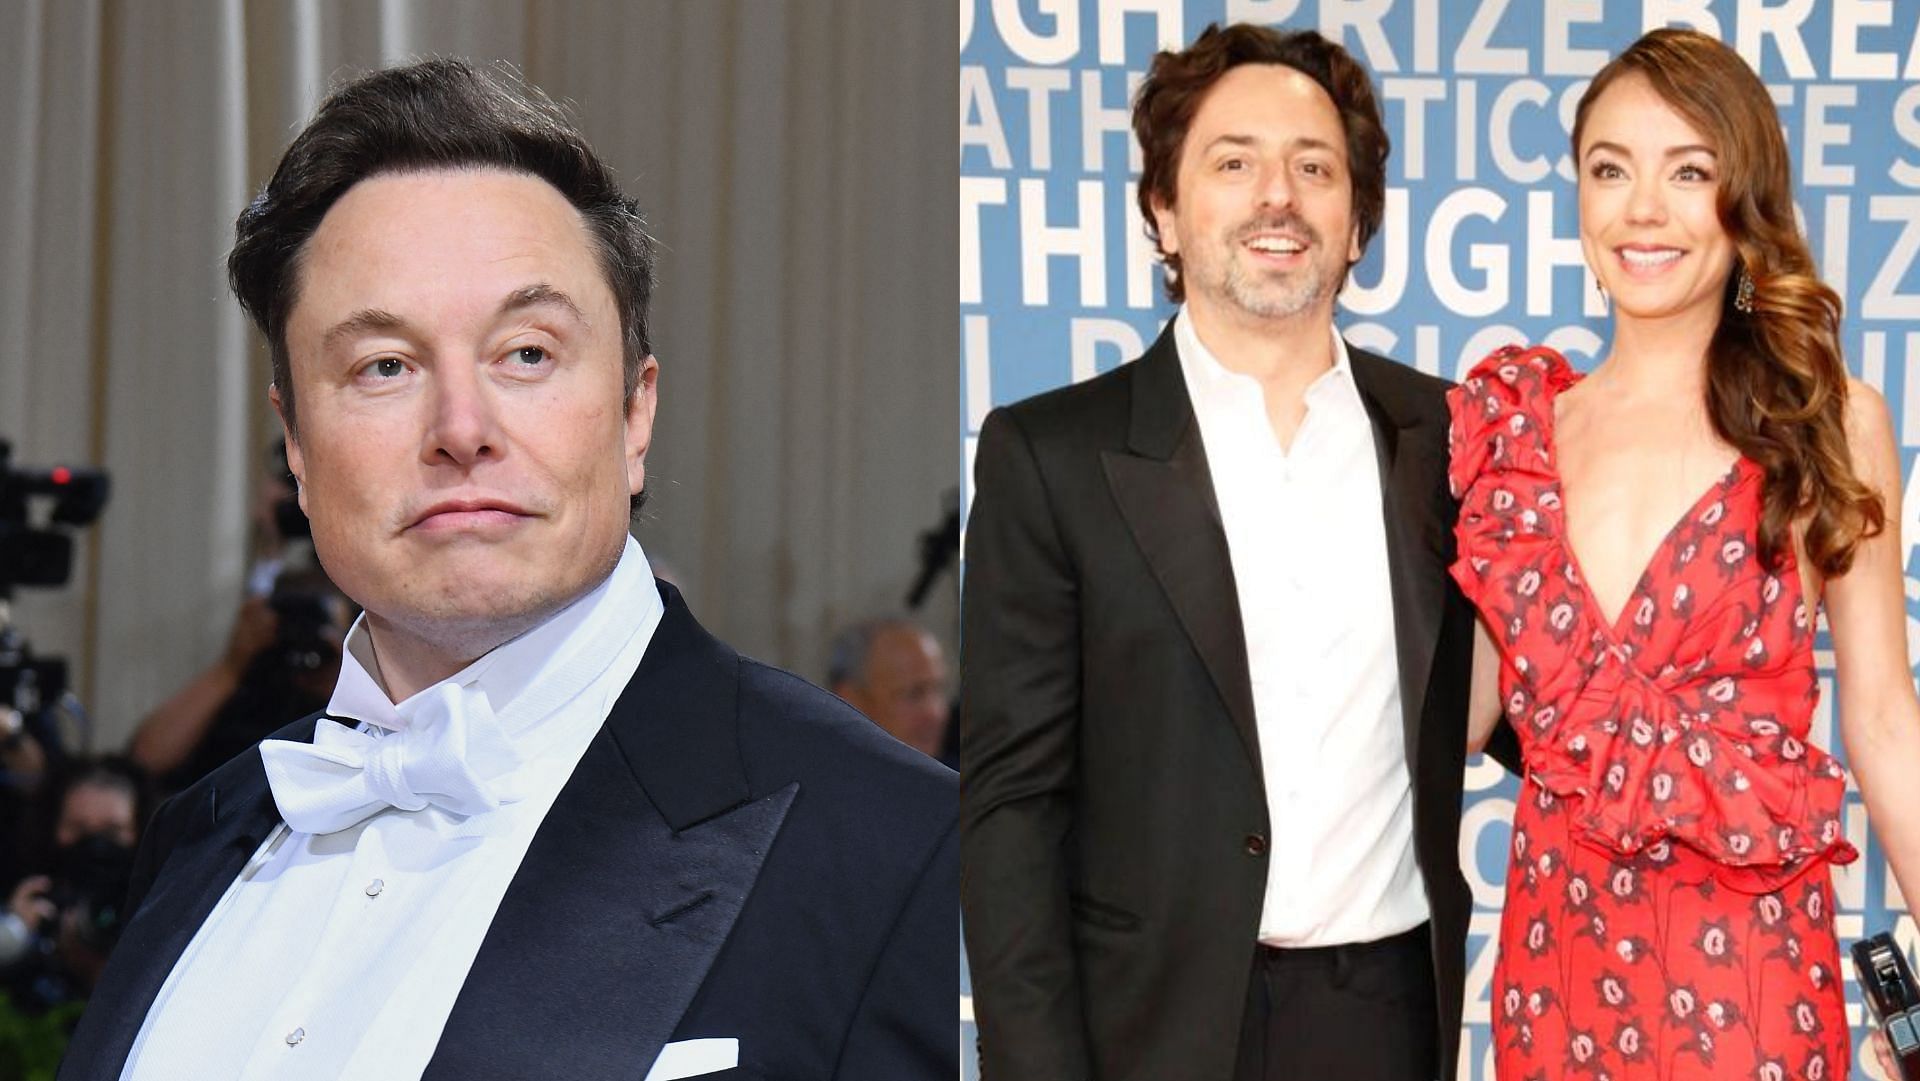 Elon Musk has denied being romantically involved with Google co-founder Sergey Brin&#039;s wife, Nicole Shanahan. (Image via Angela Weiss/Getty, Kimberly White/Getty)